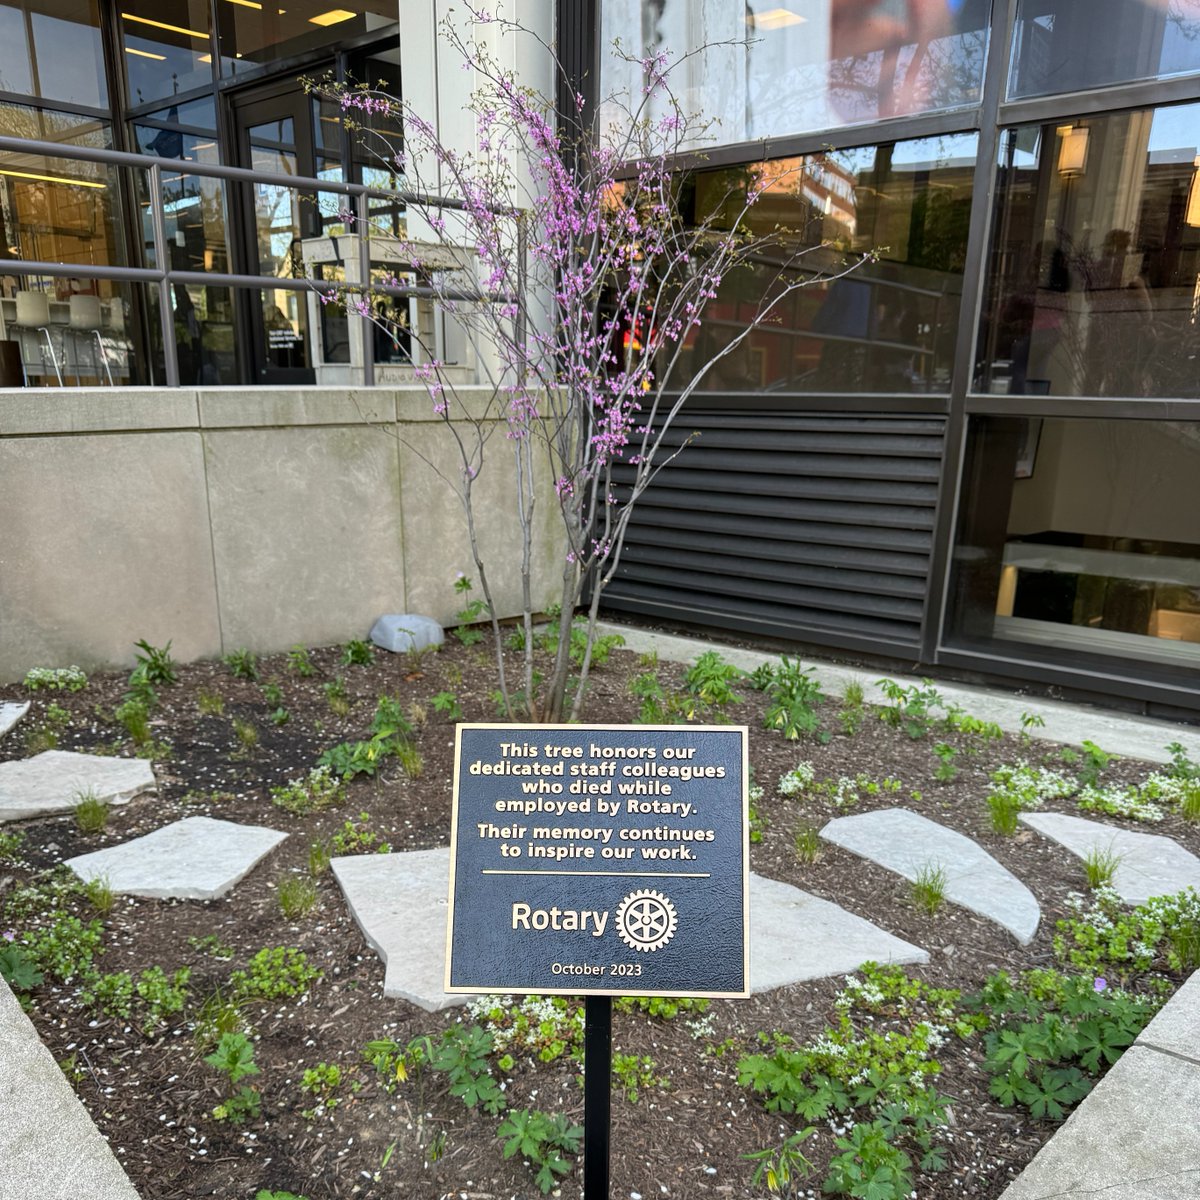 A very moving ceremony this week to dedicate a tree and memorial to @Rotary employees who passed away while working for our organization. Their passion and support for our mission and the impacts they had on the lives of so many will never be forgotten. May they rest in peace 💛